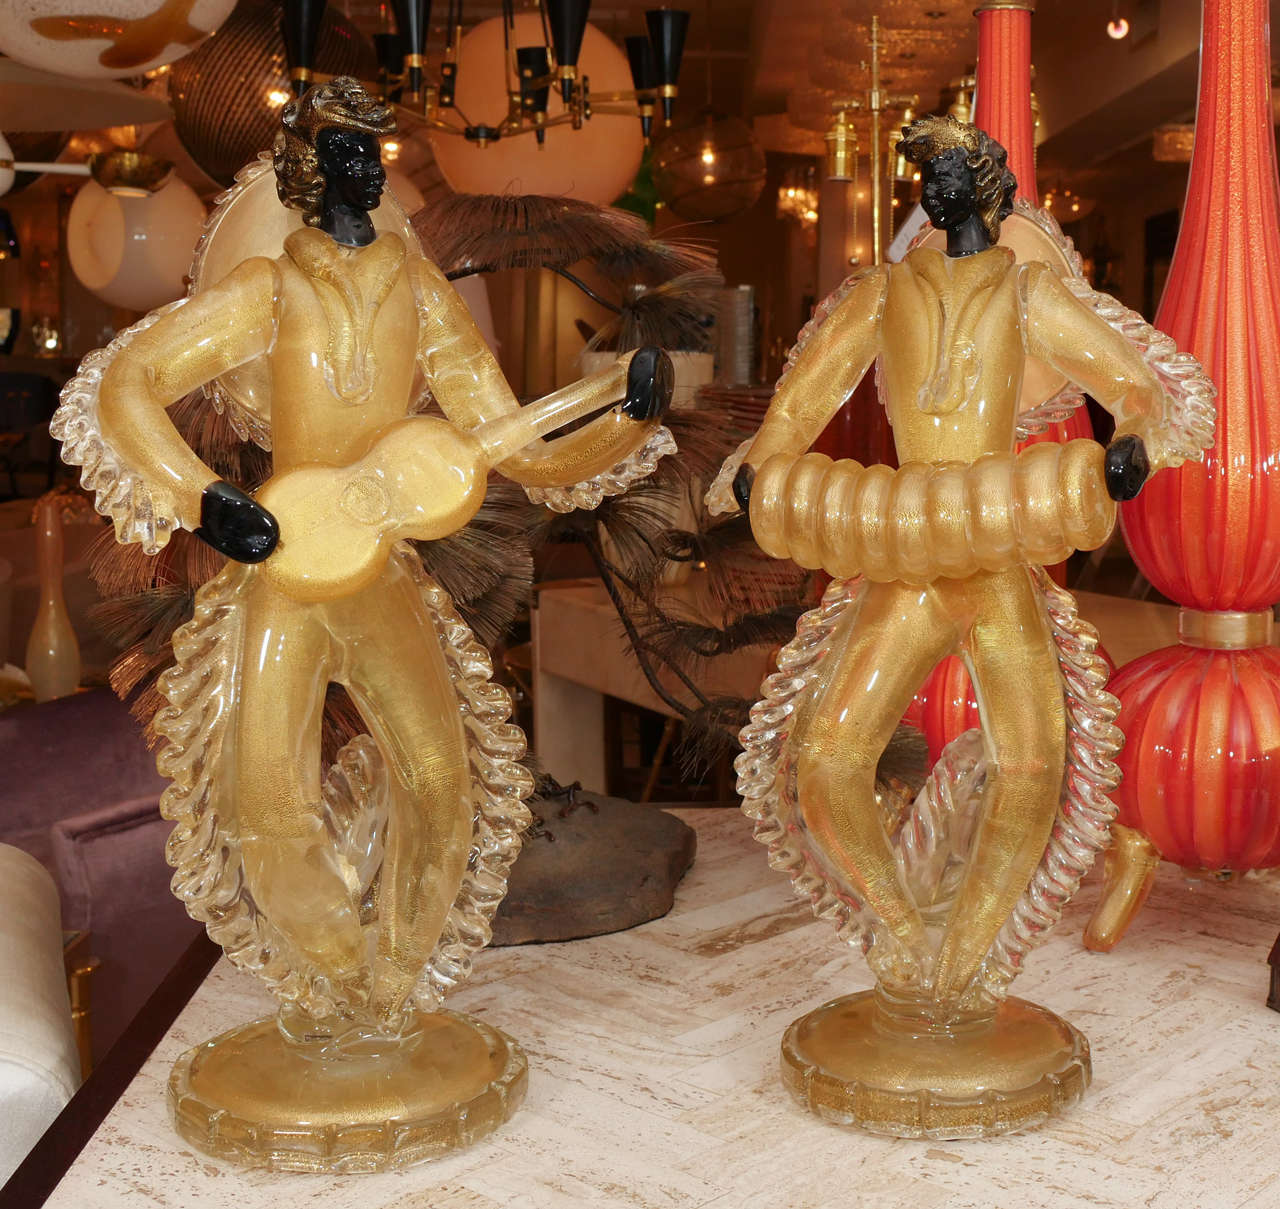 Pair of Venetian glass musicians by Barovier.